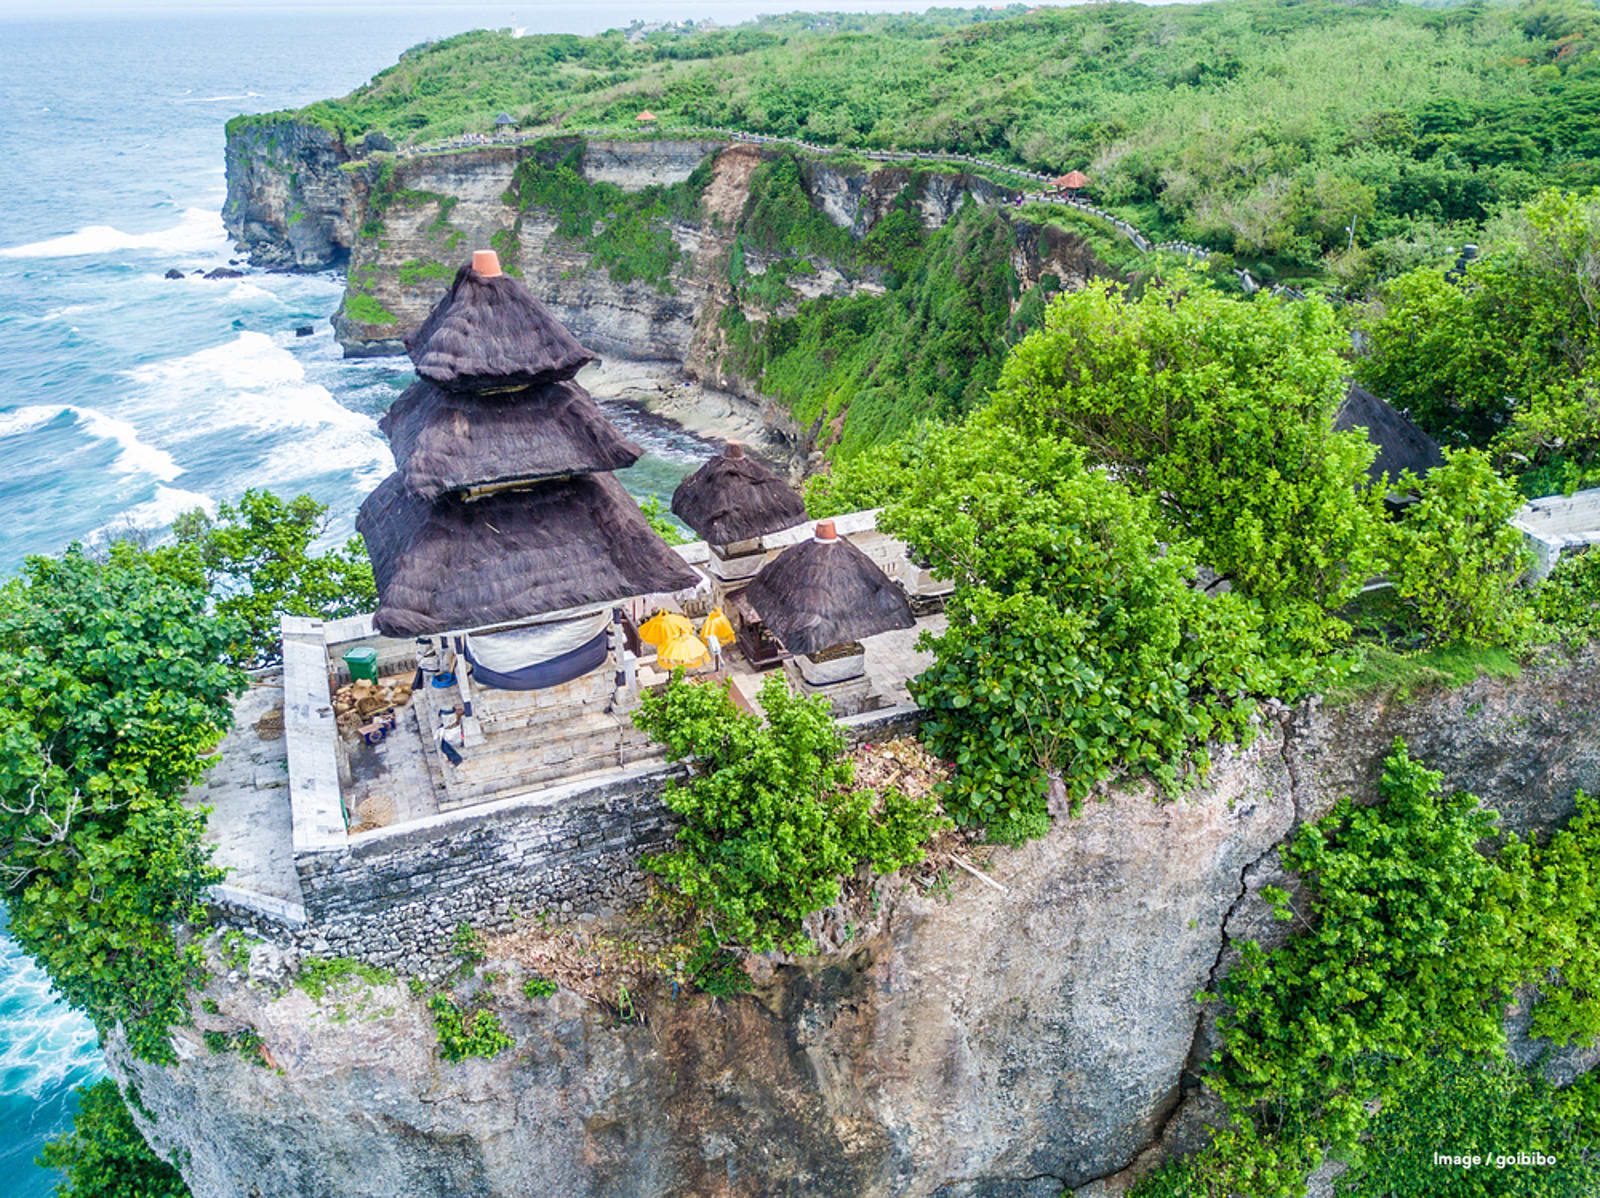 Uluwatu Temple Bali Overlooking the Indian Ocean, perched on a clff